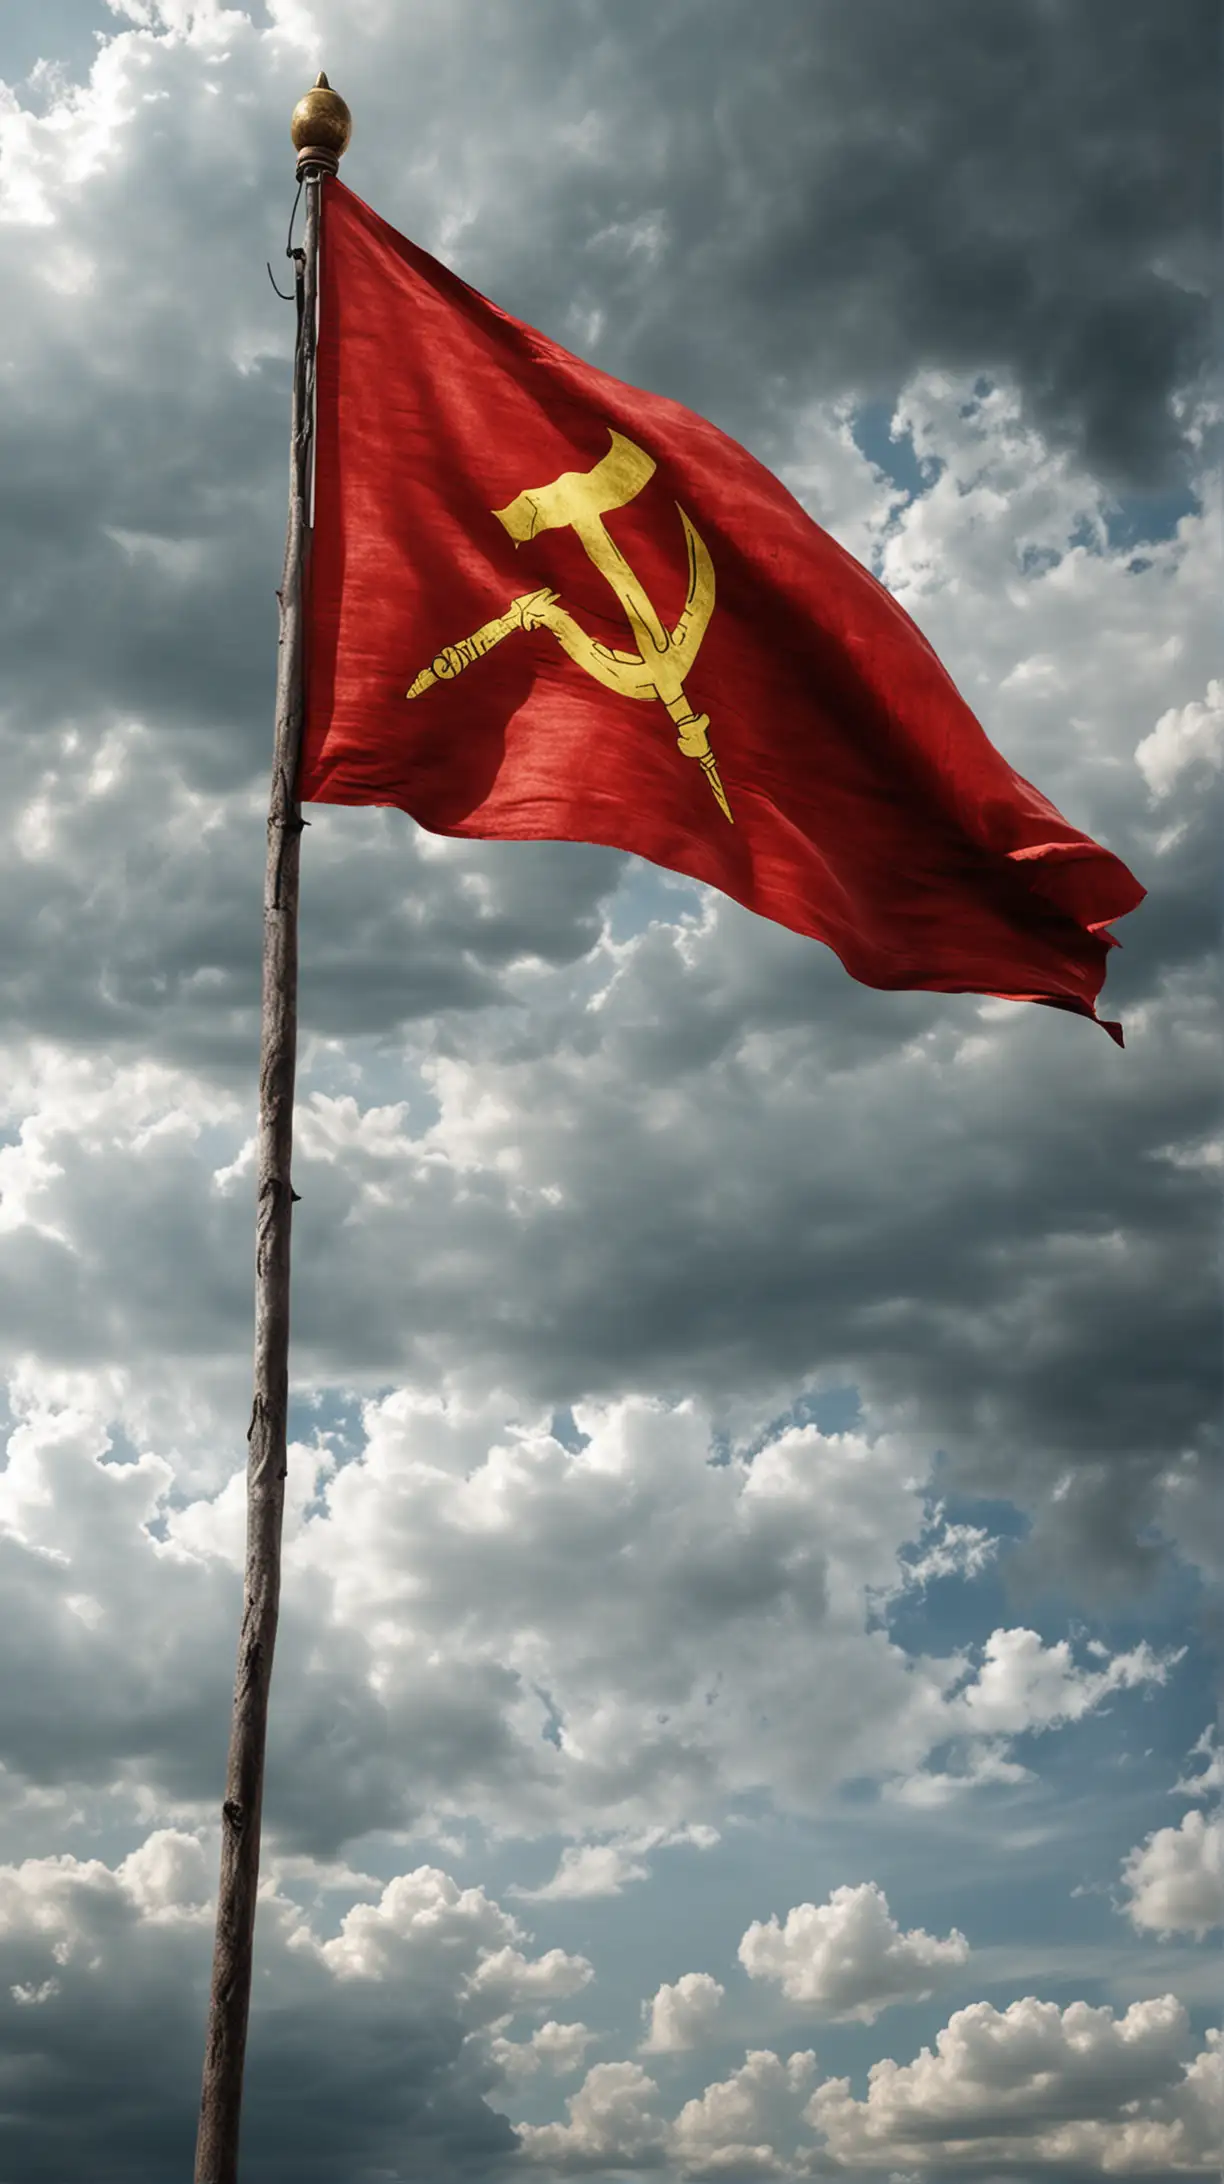 Soviet Flag: A high-resolution image of the iconic red Soviet flag with the hammer and sickle, fluttering in the wind against a cloudy sky. Add a caption explaining its significance as the symbol of the USSR. Hyper realistic